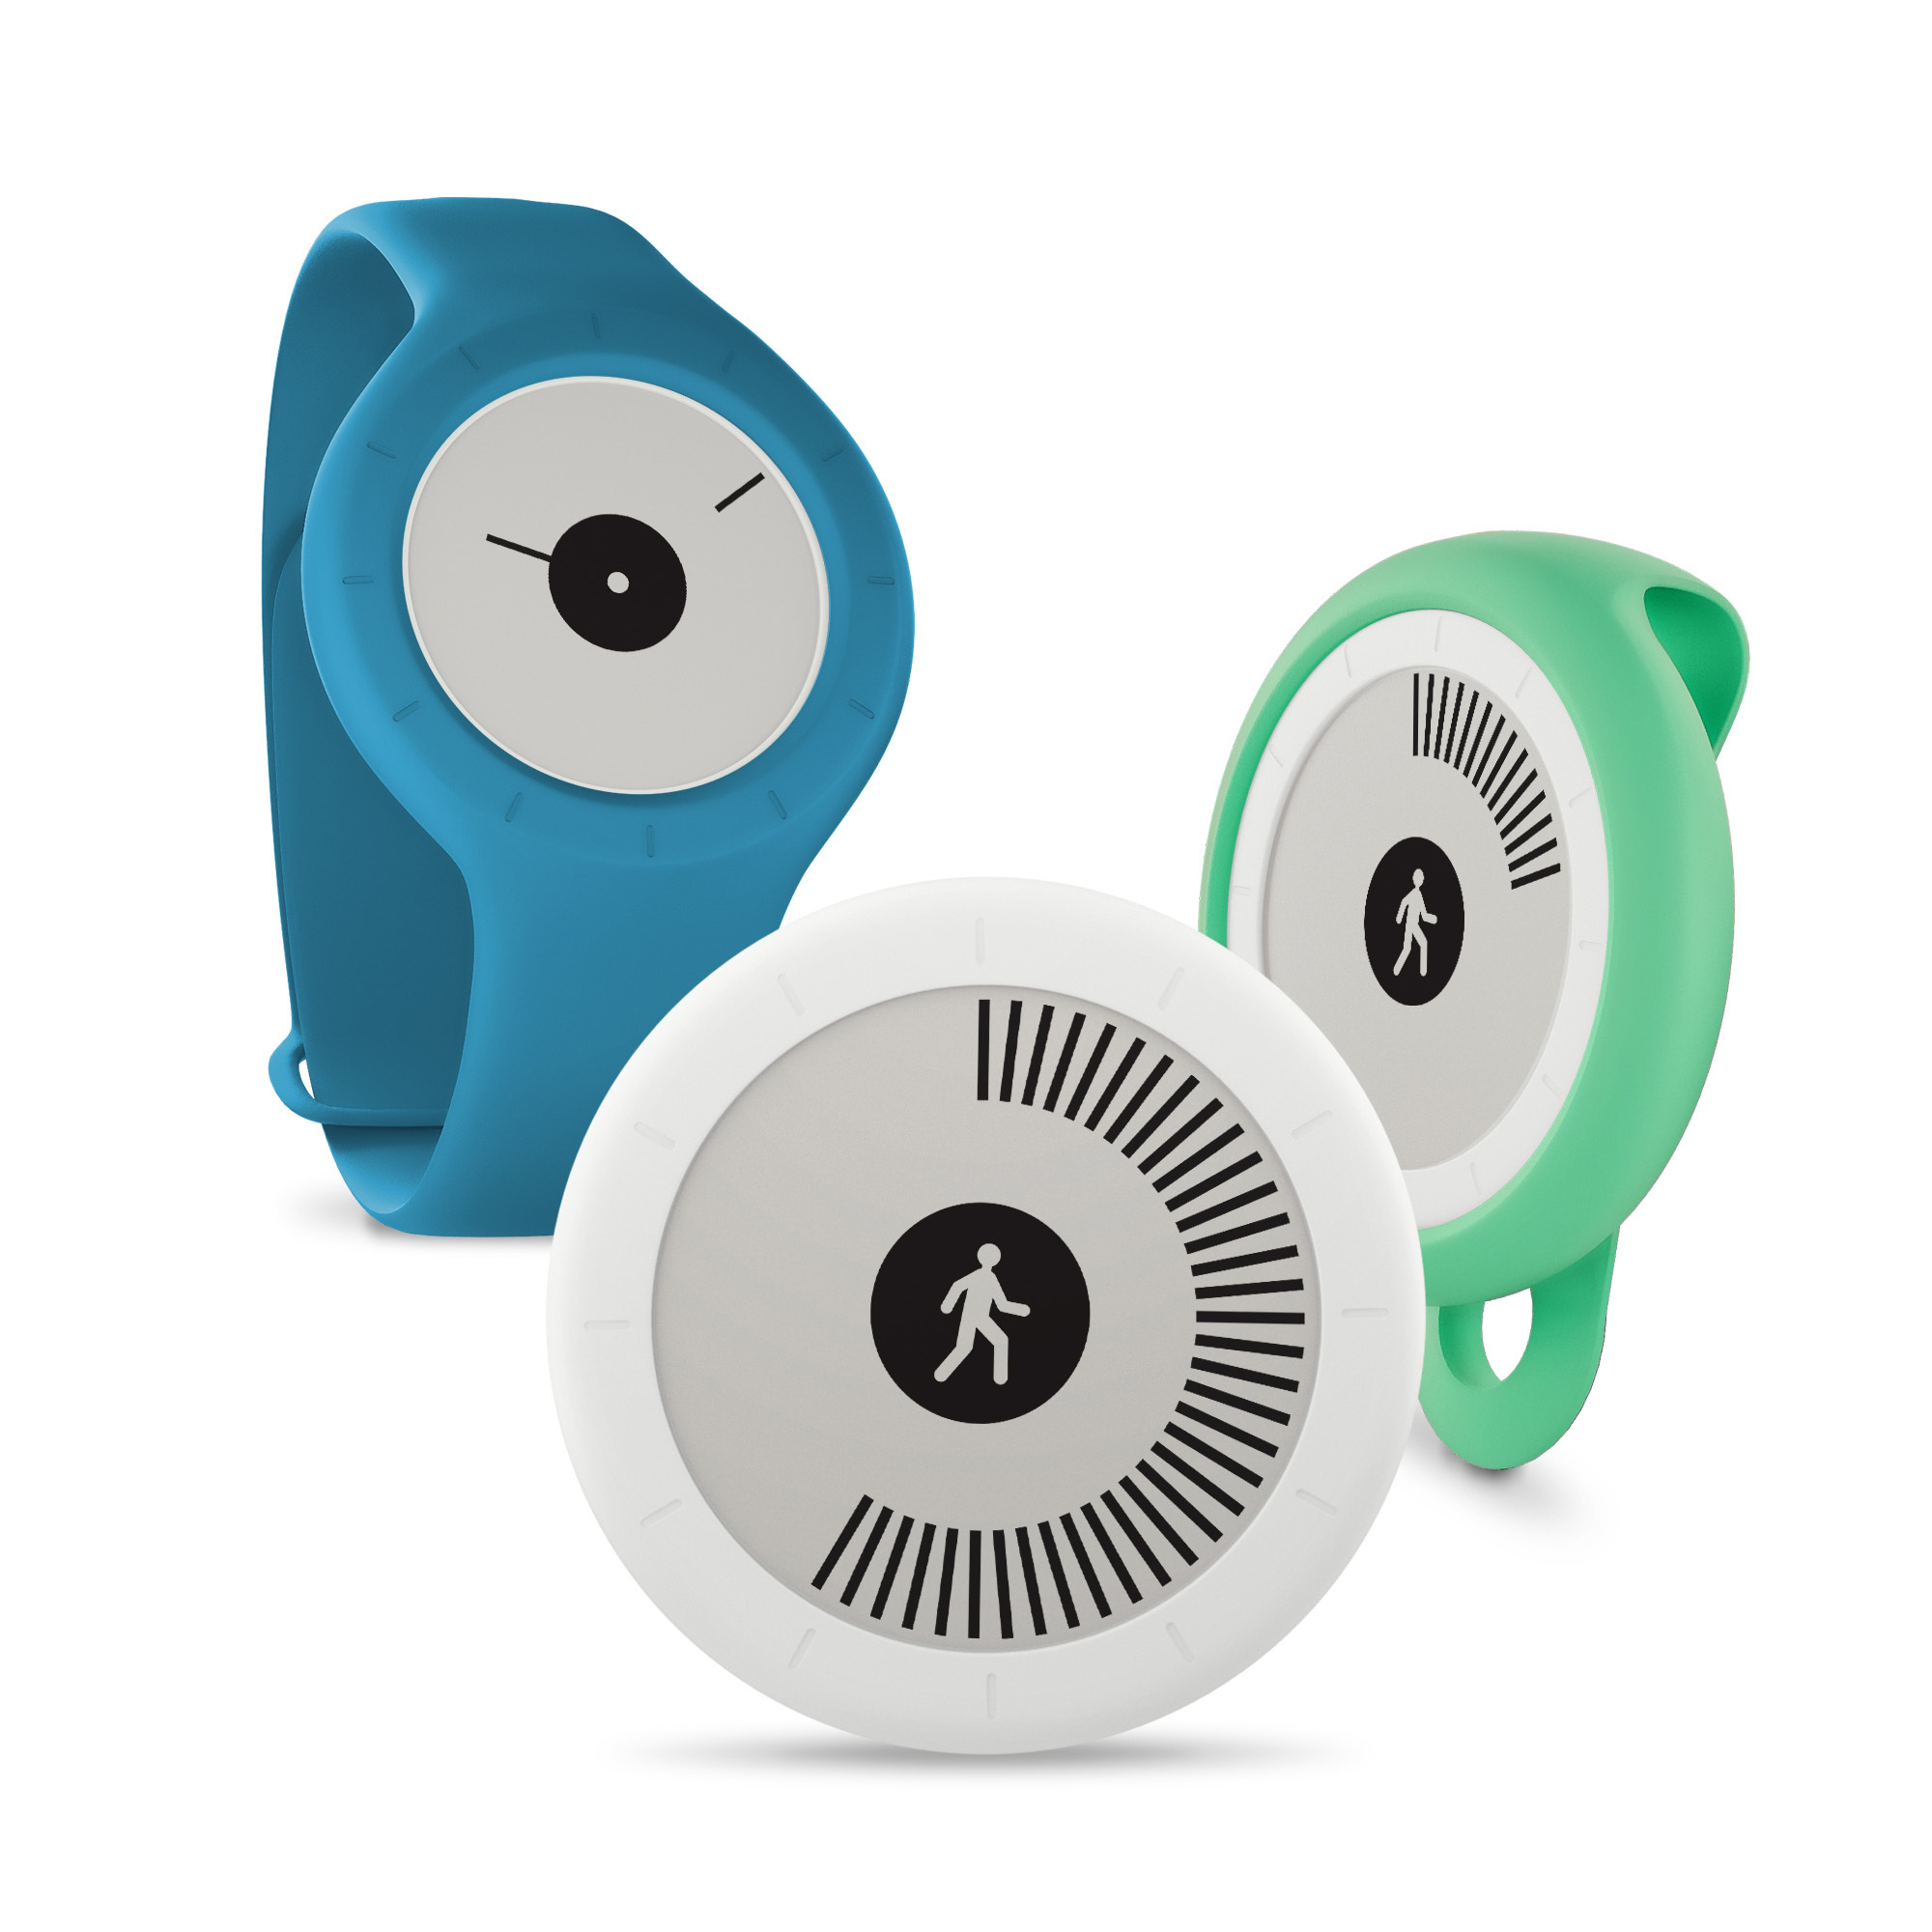 withings tracker